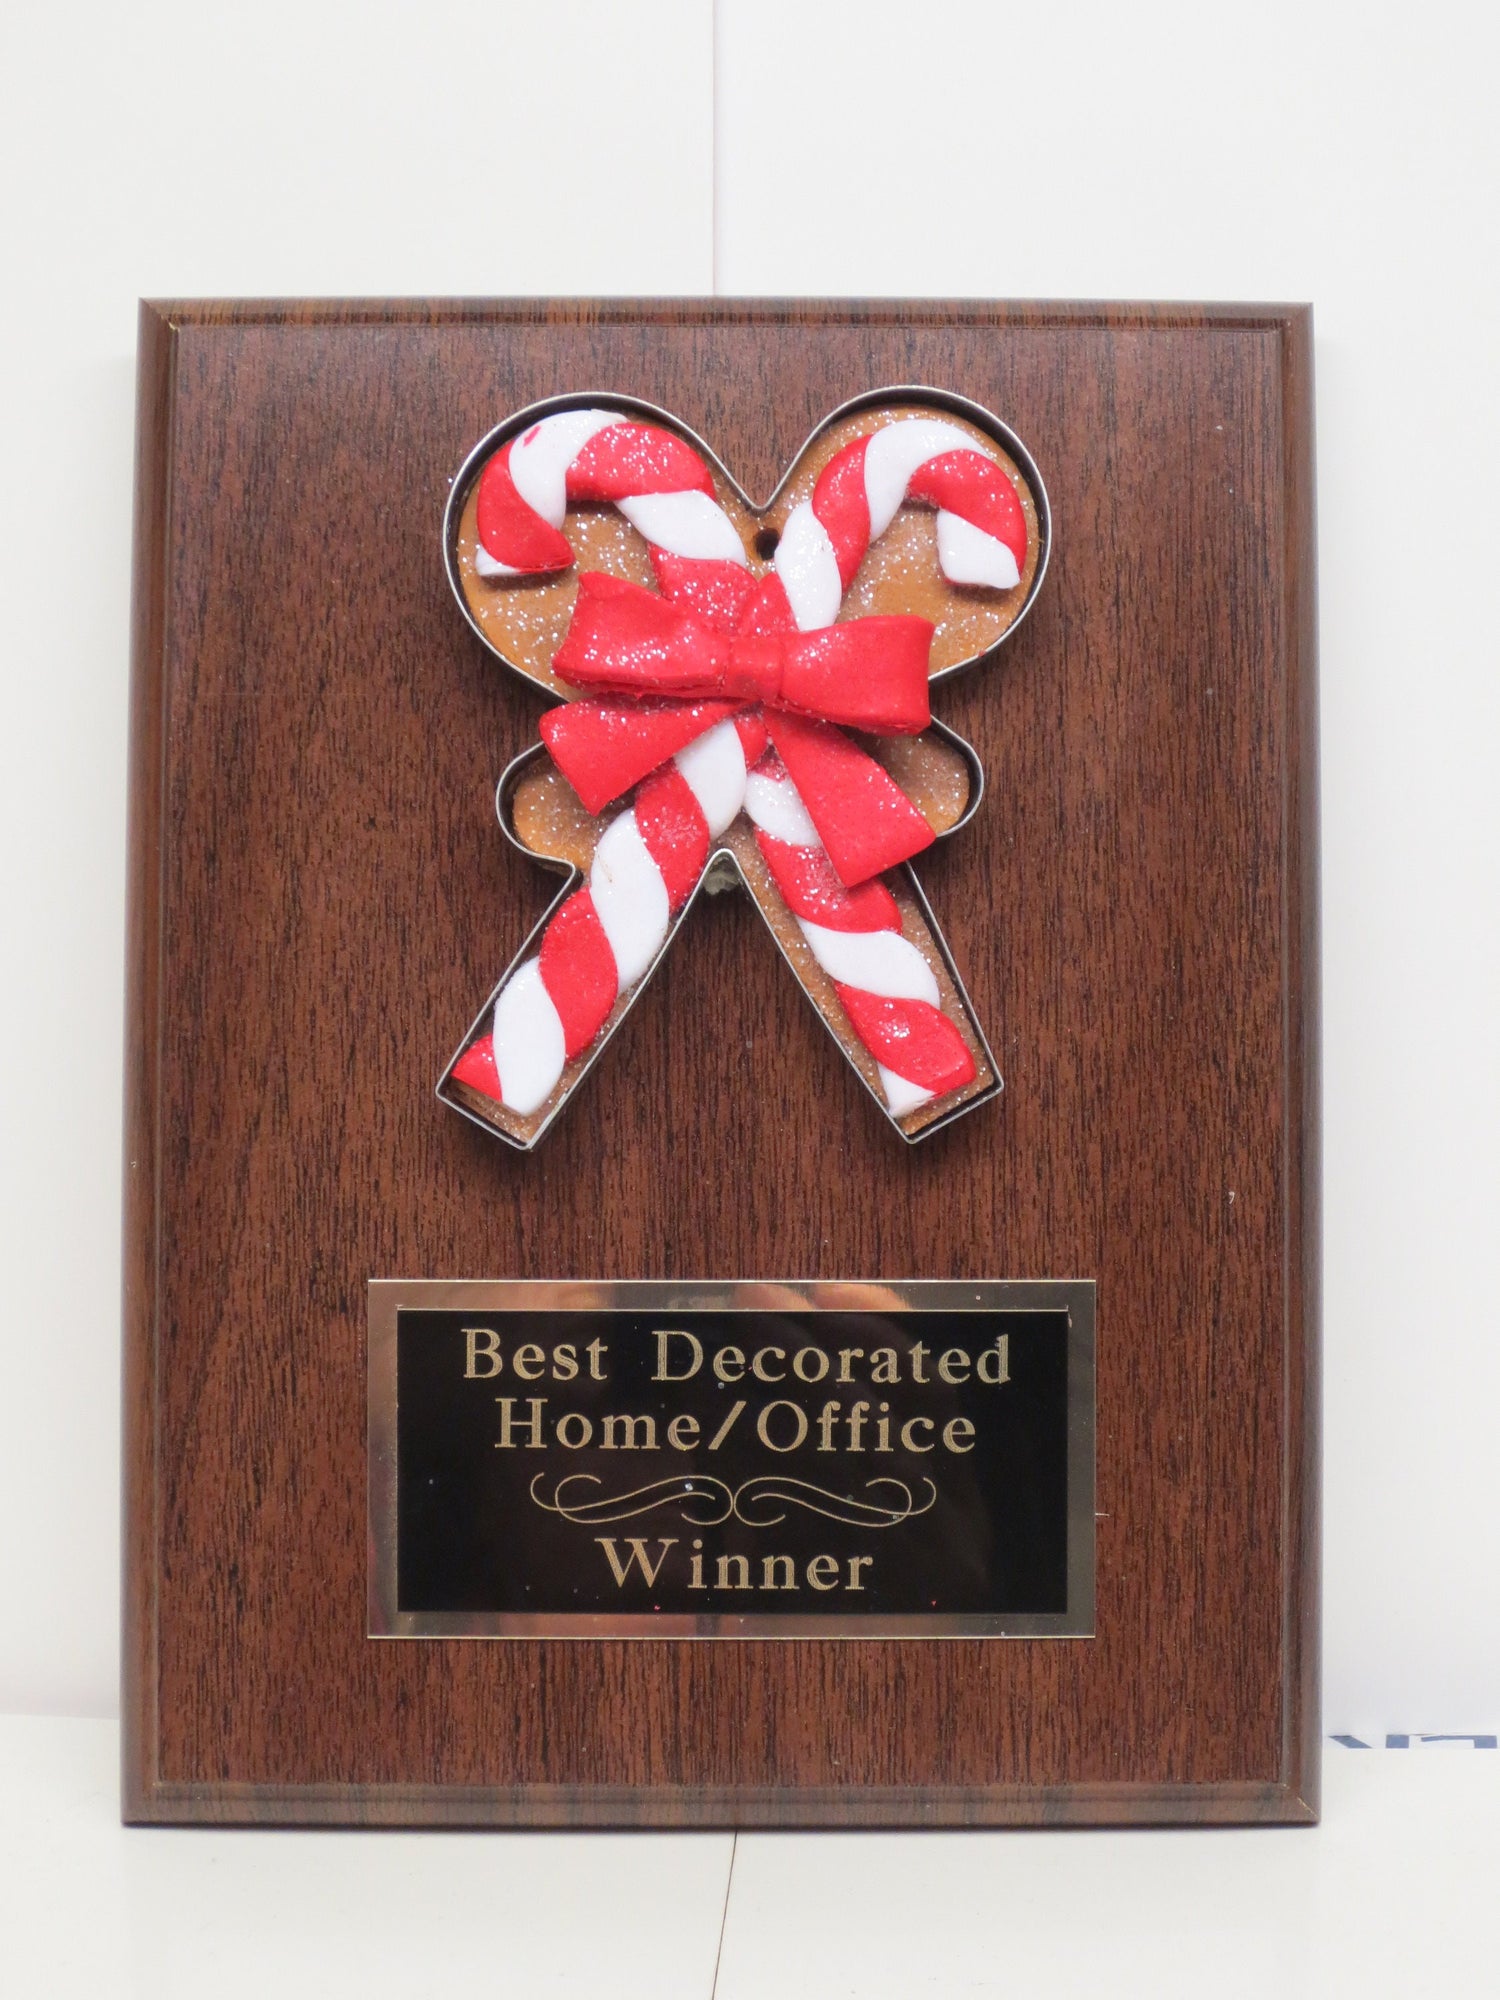 Best Decorated Office Christmas Trophy Gingerbread Cookie Bake Off Contest Ugly Sweater Award Winner Candy Cane Christmas Decor Holiday